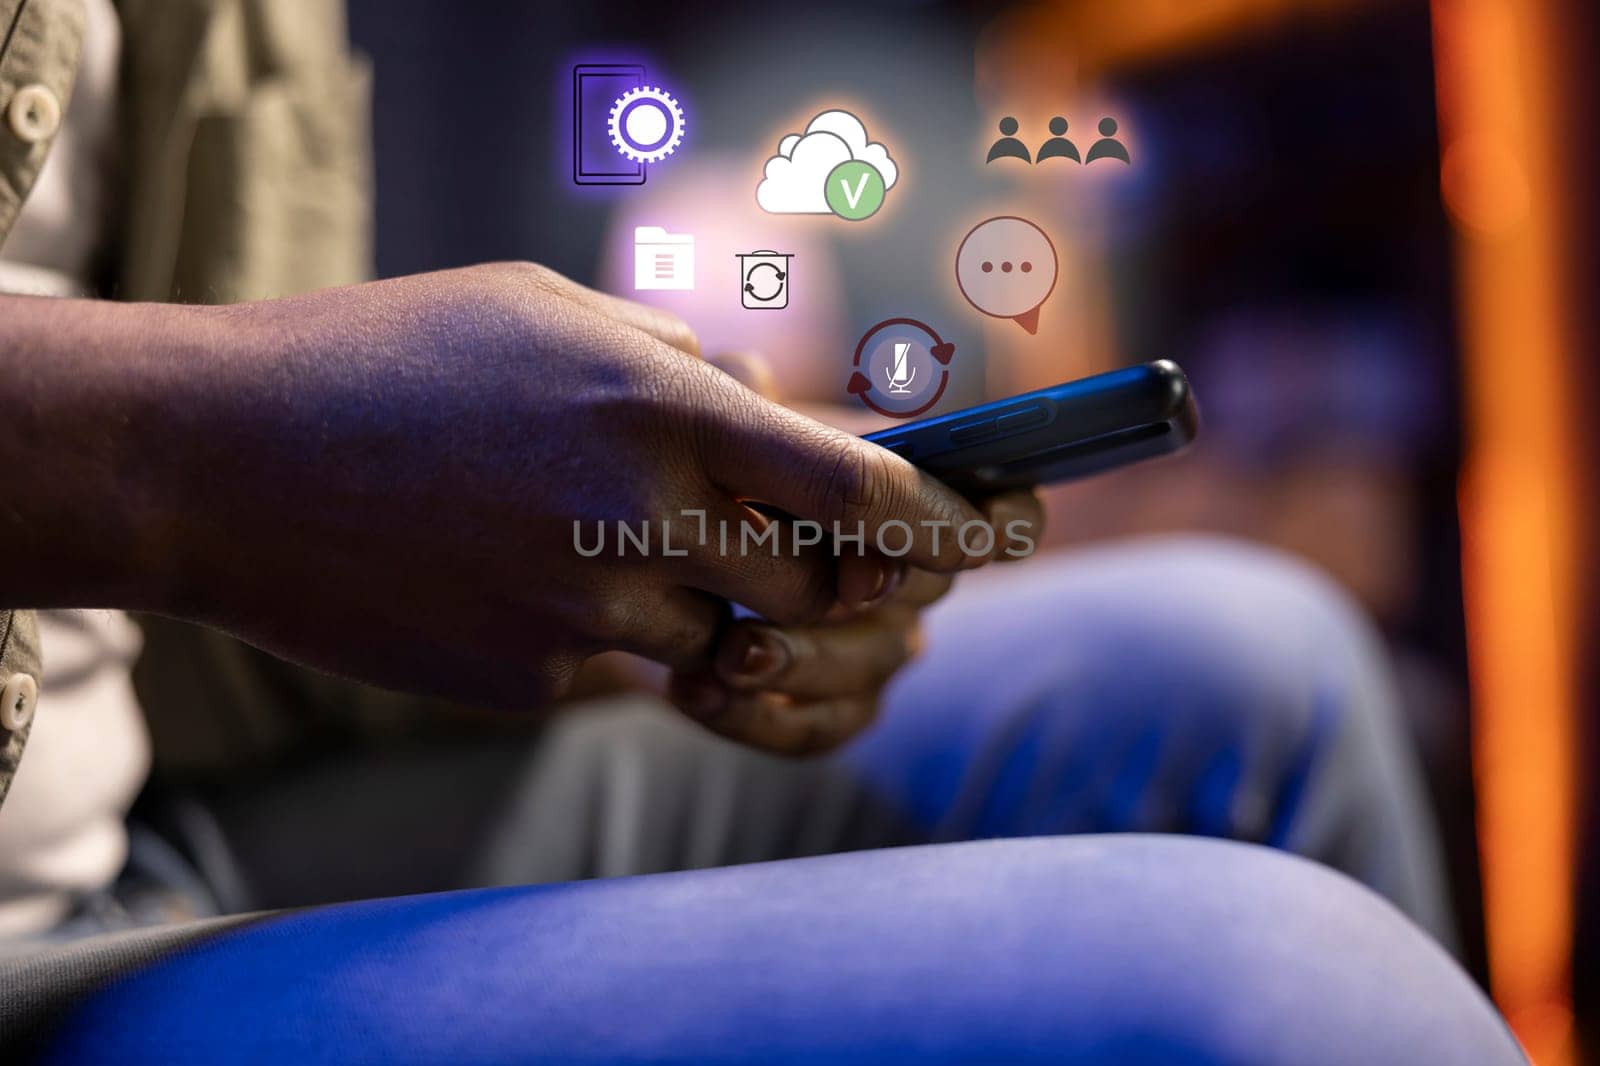 Person at home using phone, interacting with people online using AR technology, close up shot. Internet user spending time online on smartphone, augmented reality visualization